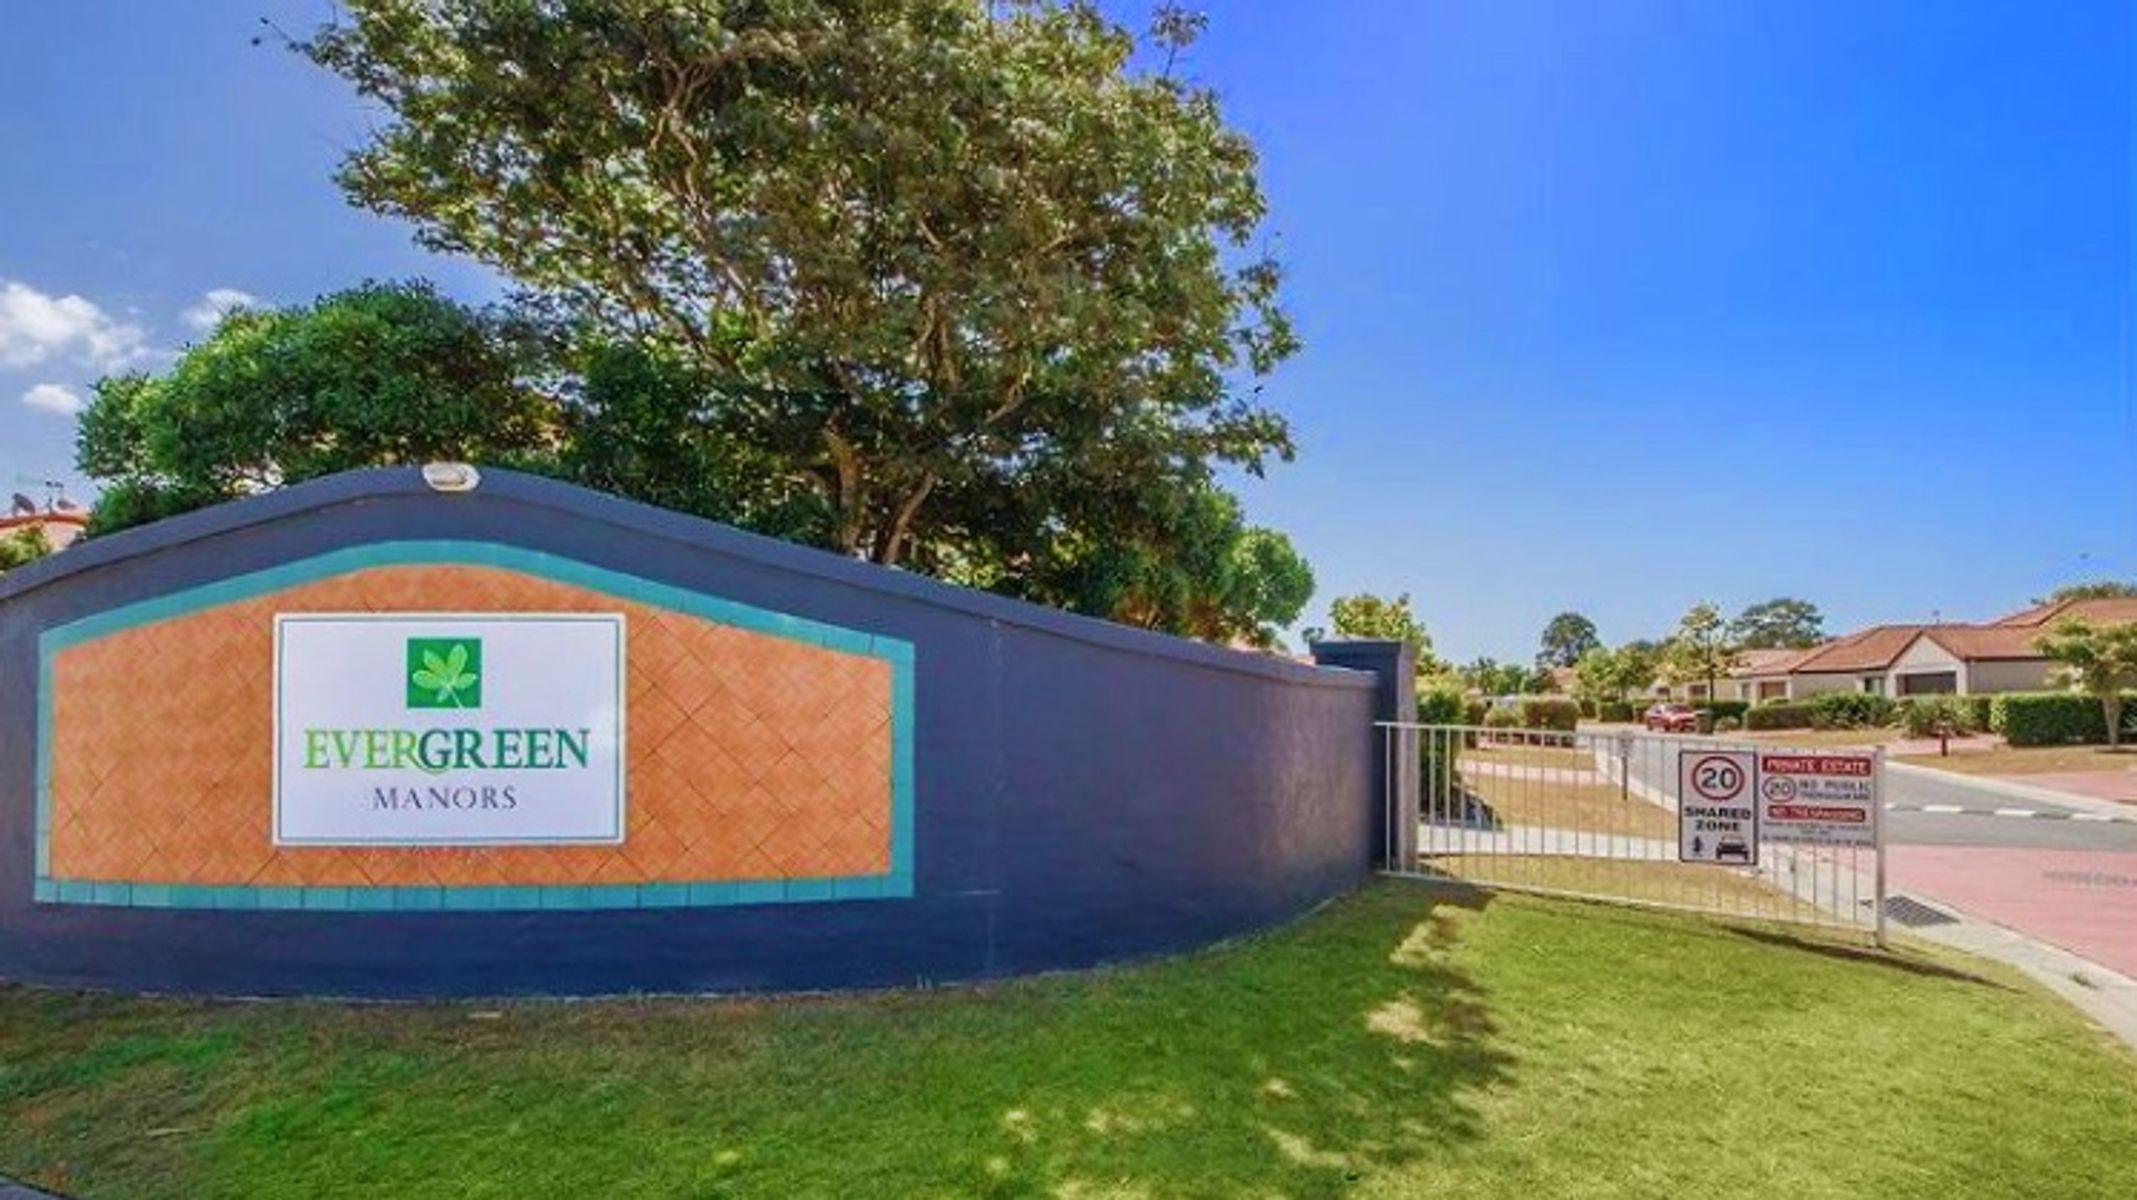 17 19 Yaun st Coomera Alessia Tang Area Specialist 13